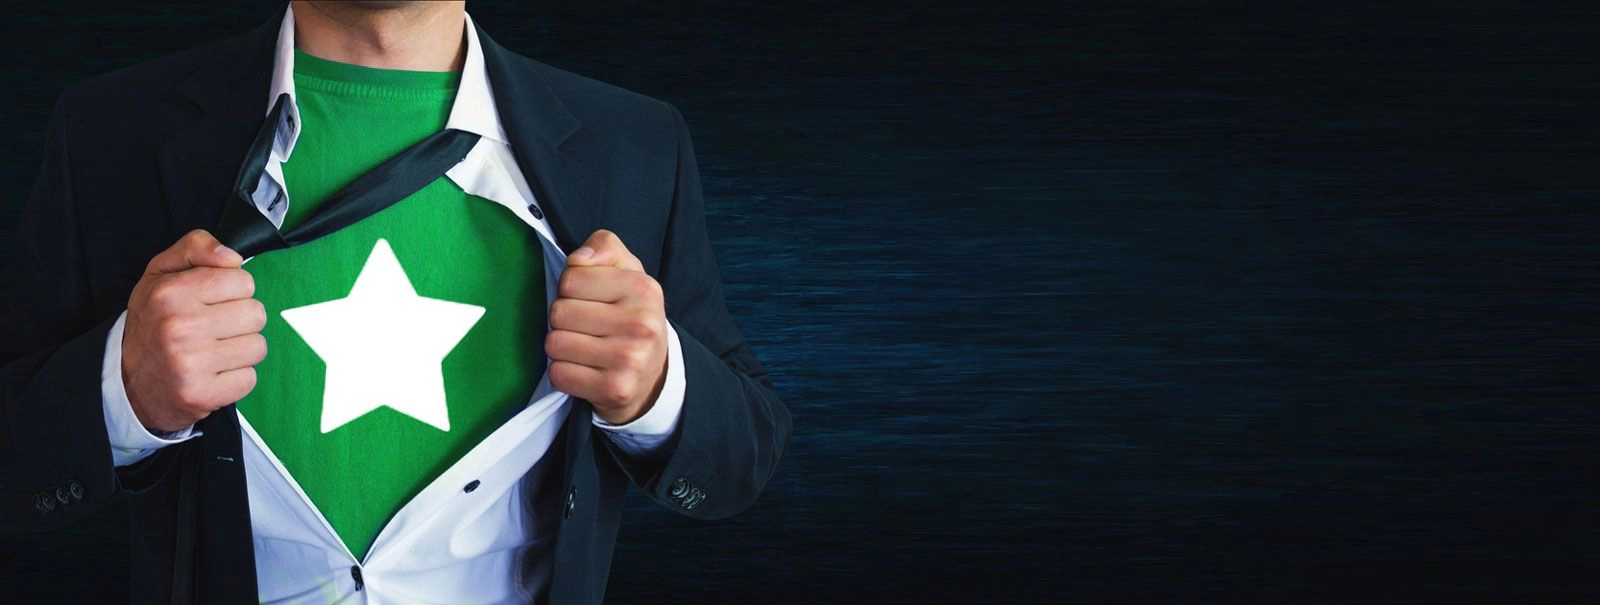 A man pulling open his business shirt to reveal a green superhero shirt underneath